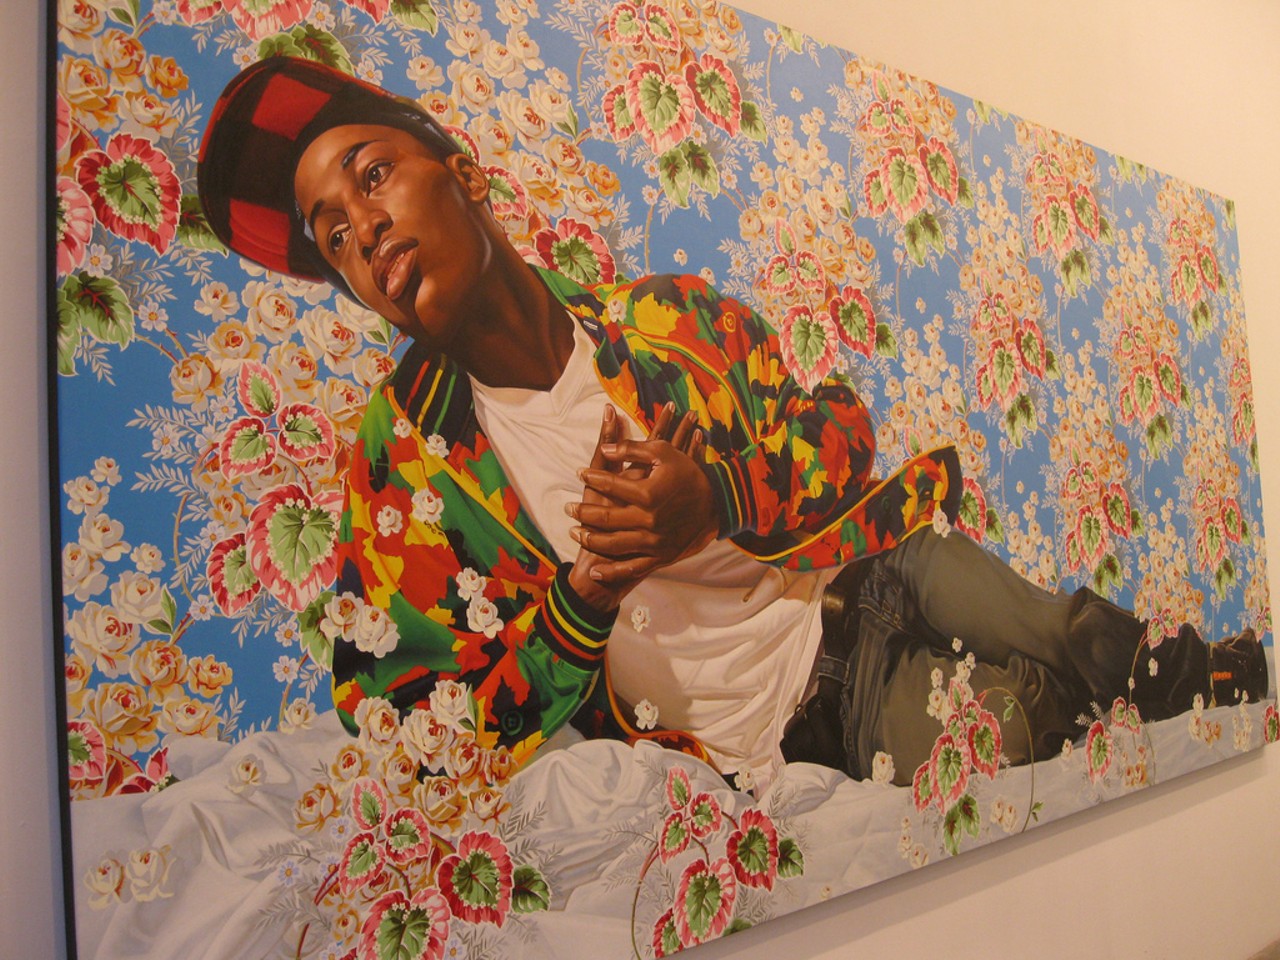 See some real human accomplishments
Artist Kehinde Wiley leapt into the public consciousness when his presidential portrait of Barack Obama was unveiled, but he&#146;s been making vital work that explores the nexus of race and representation for years. From now though February 10, the St. Louis Art Museum (1 Fine Arts Dr.; 314-731-0072) presents Kehinde Wiley: Saint Louis, an exhibition of eleven of large-scale paintings of everyday black St. Louisans, dressed in modern clothing yet posed in the manner of portraits of kings, statesman and other powerful figures. 
Find out more here.
Photo credit: Jenna Wortham / Flickr